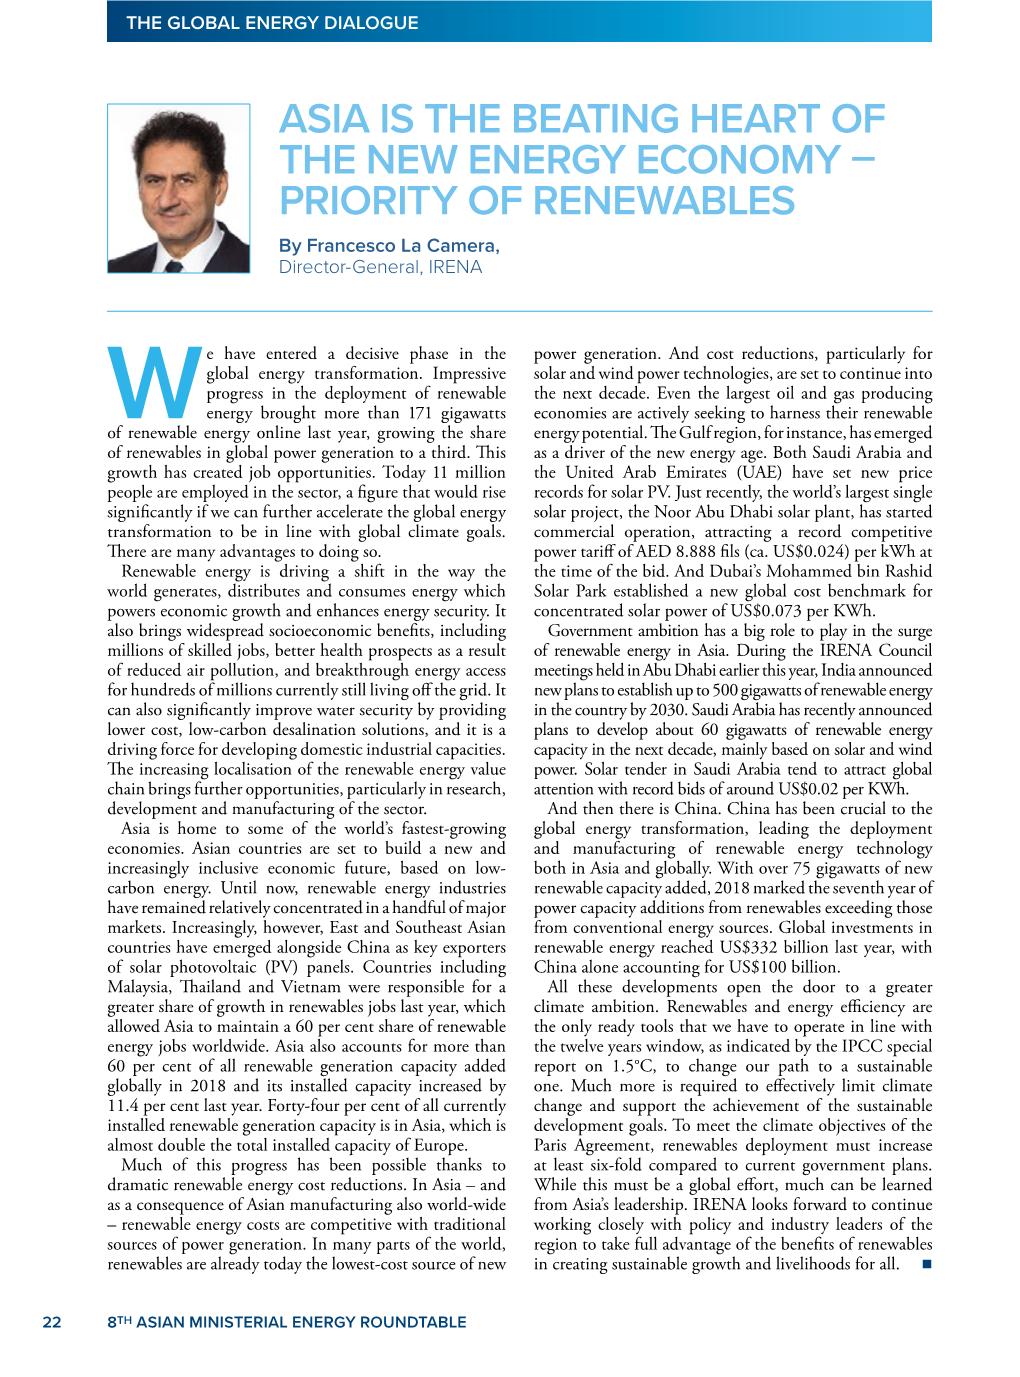 ASIA IS the BEATING HEART of the NEW ENERGY ECONOMY – PRIORITY of RENEWABLES by Francesco La Camera, Director-General, IRENA